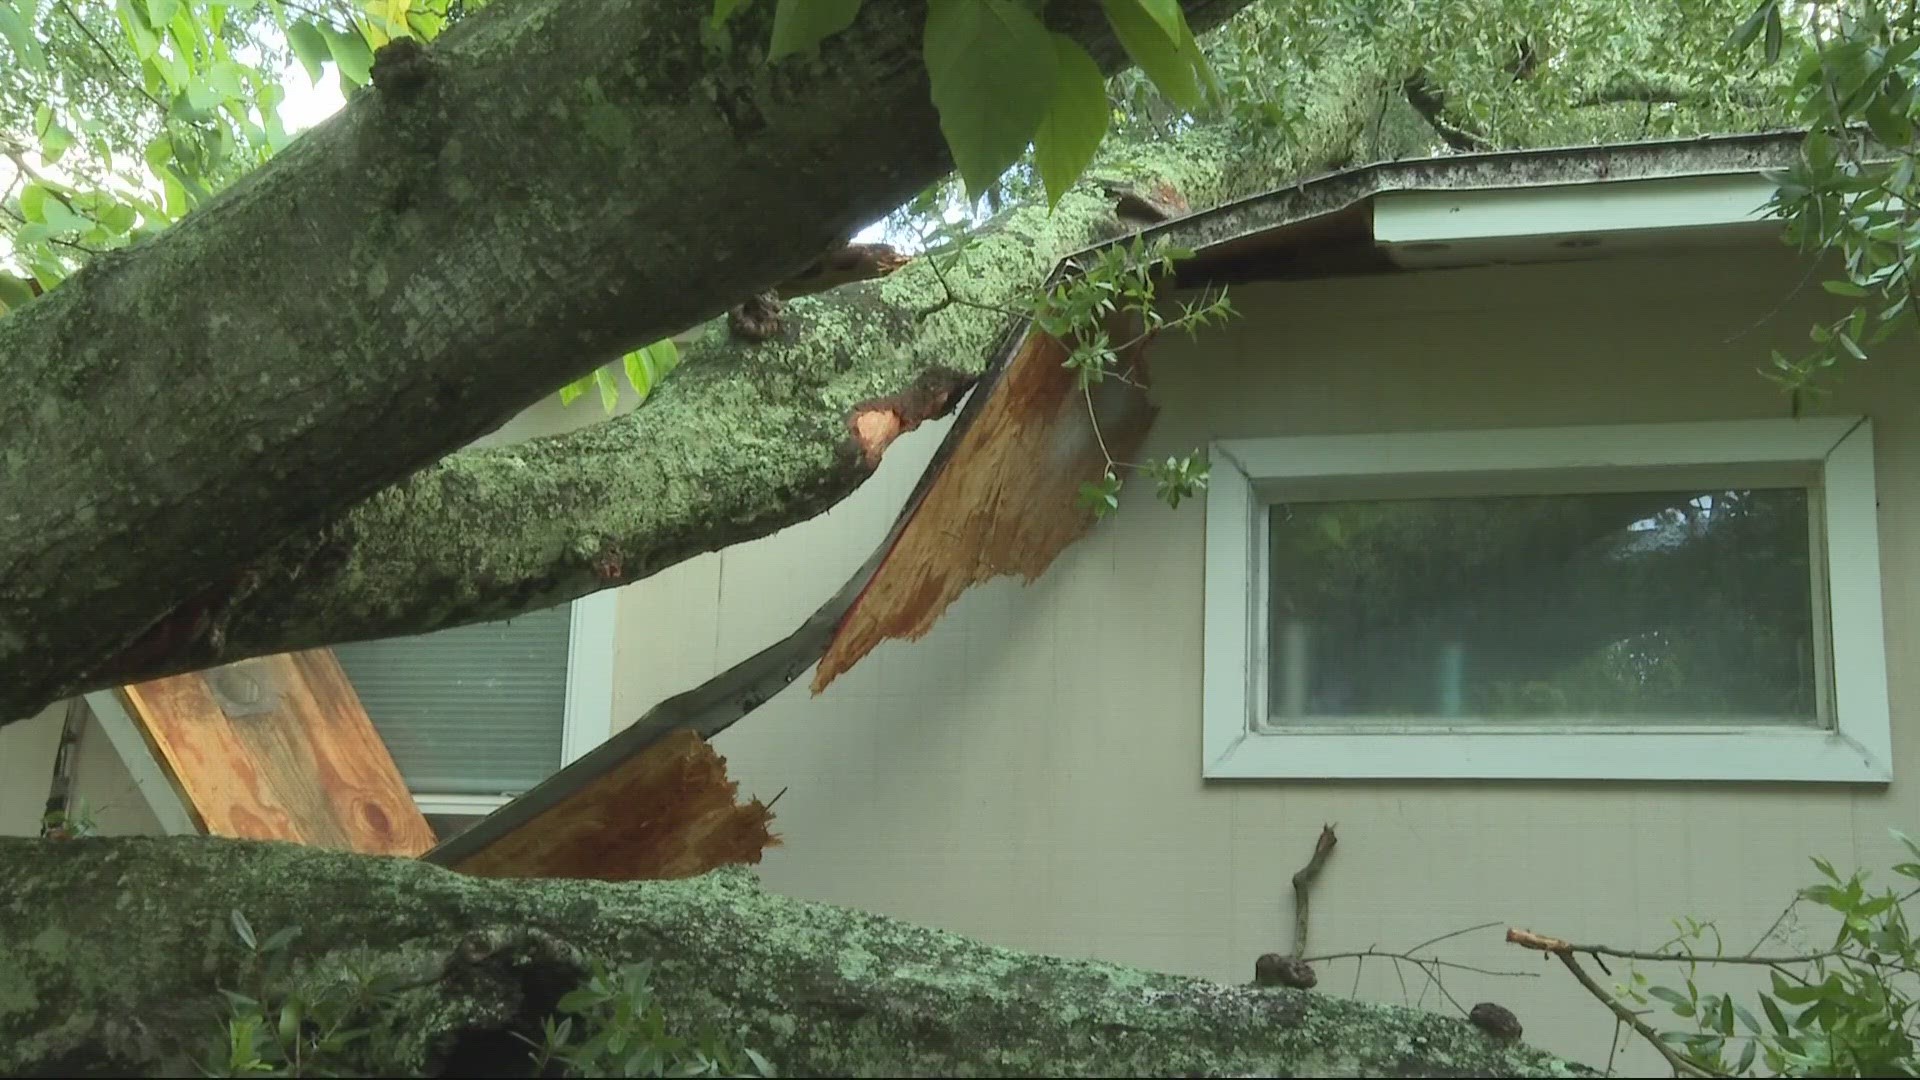 A woman who was trapped in the house during the time the tree caused damage to the home, was able to escape safely.